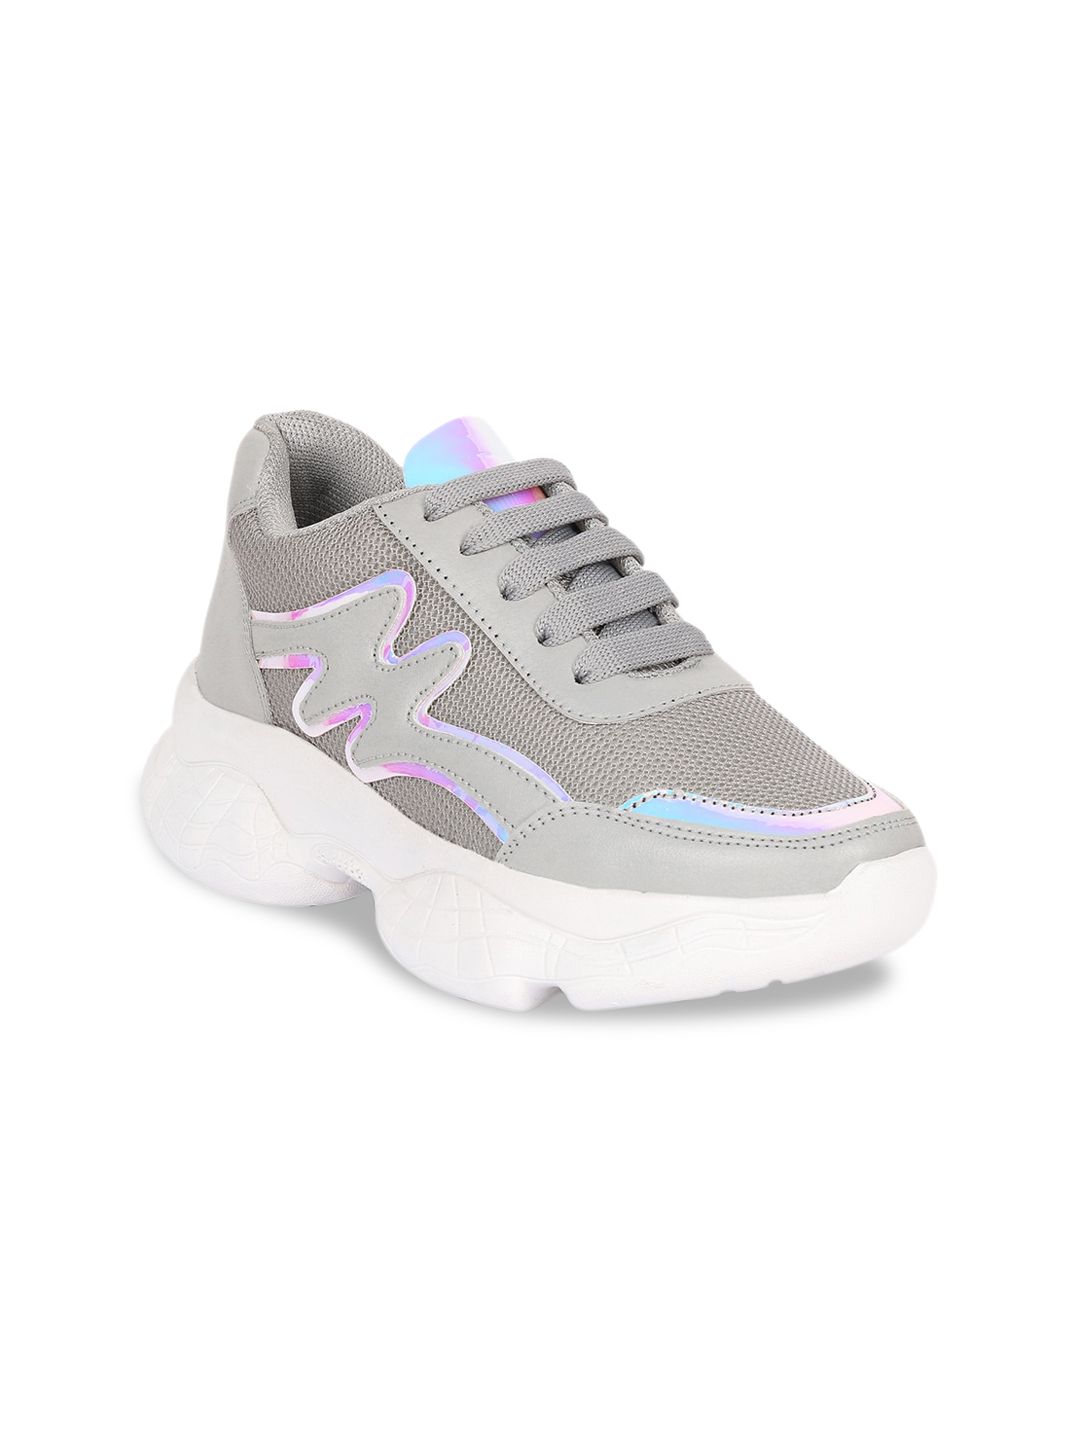 ZAPATOZ Women Grey & Turquoise Blue Colourblocked Sneakers Price in India